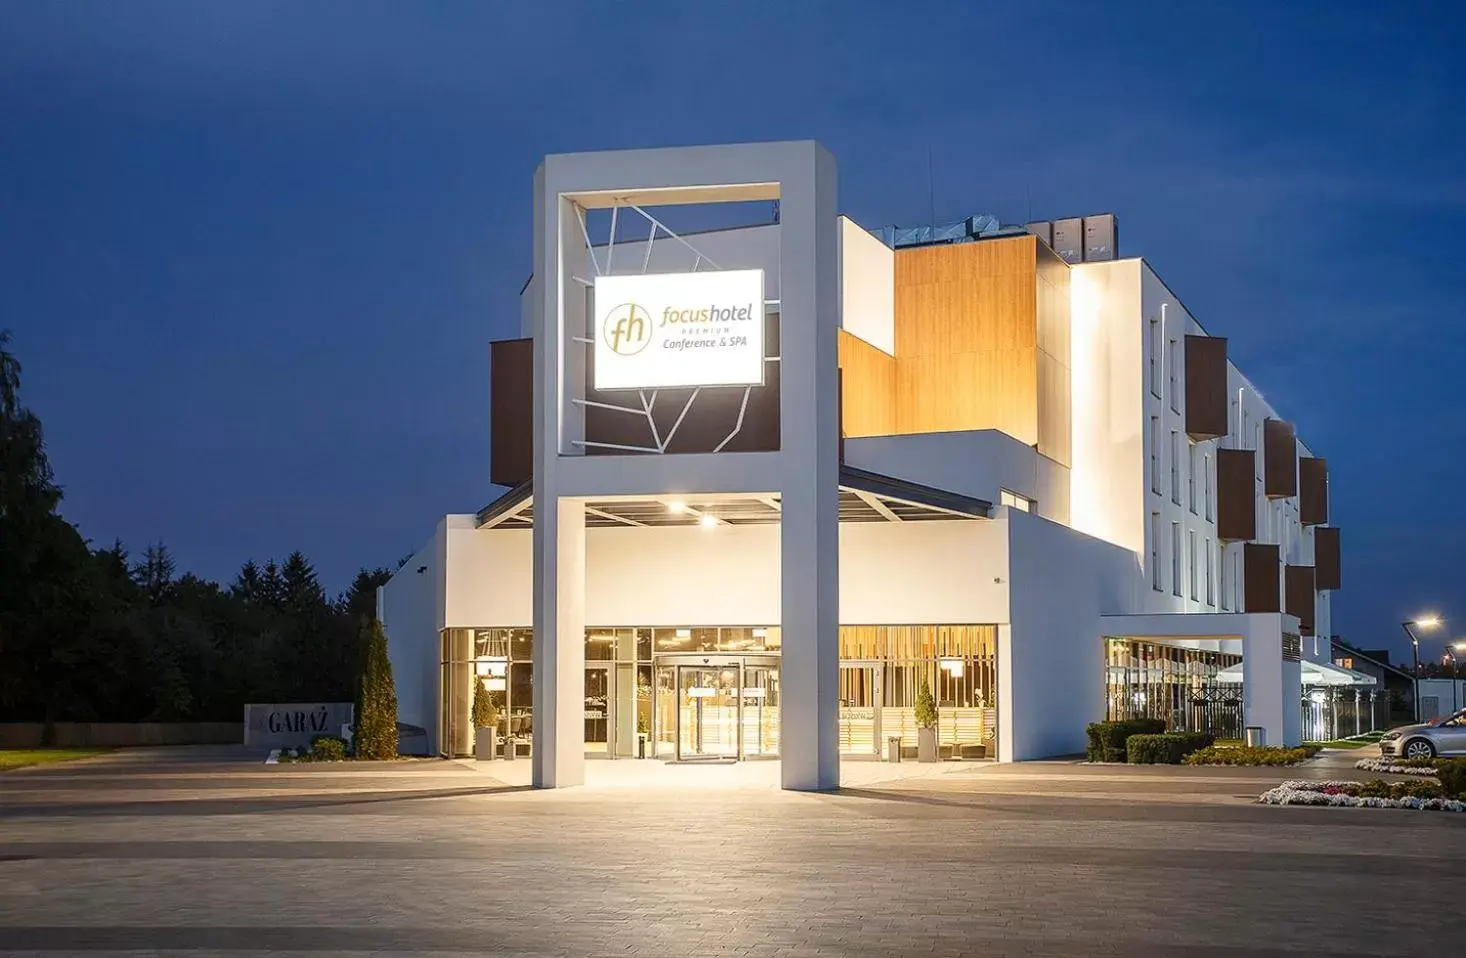 Property Building in Focus Hotel Premium Lublin Conference & SPA